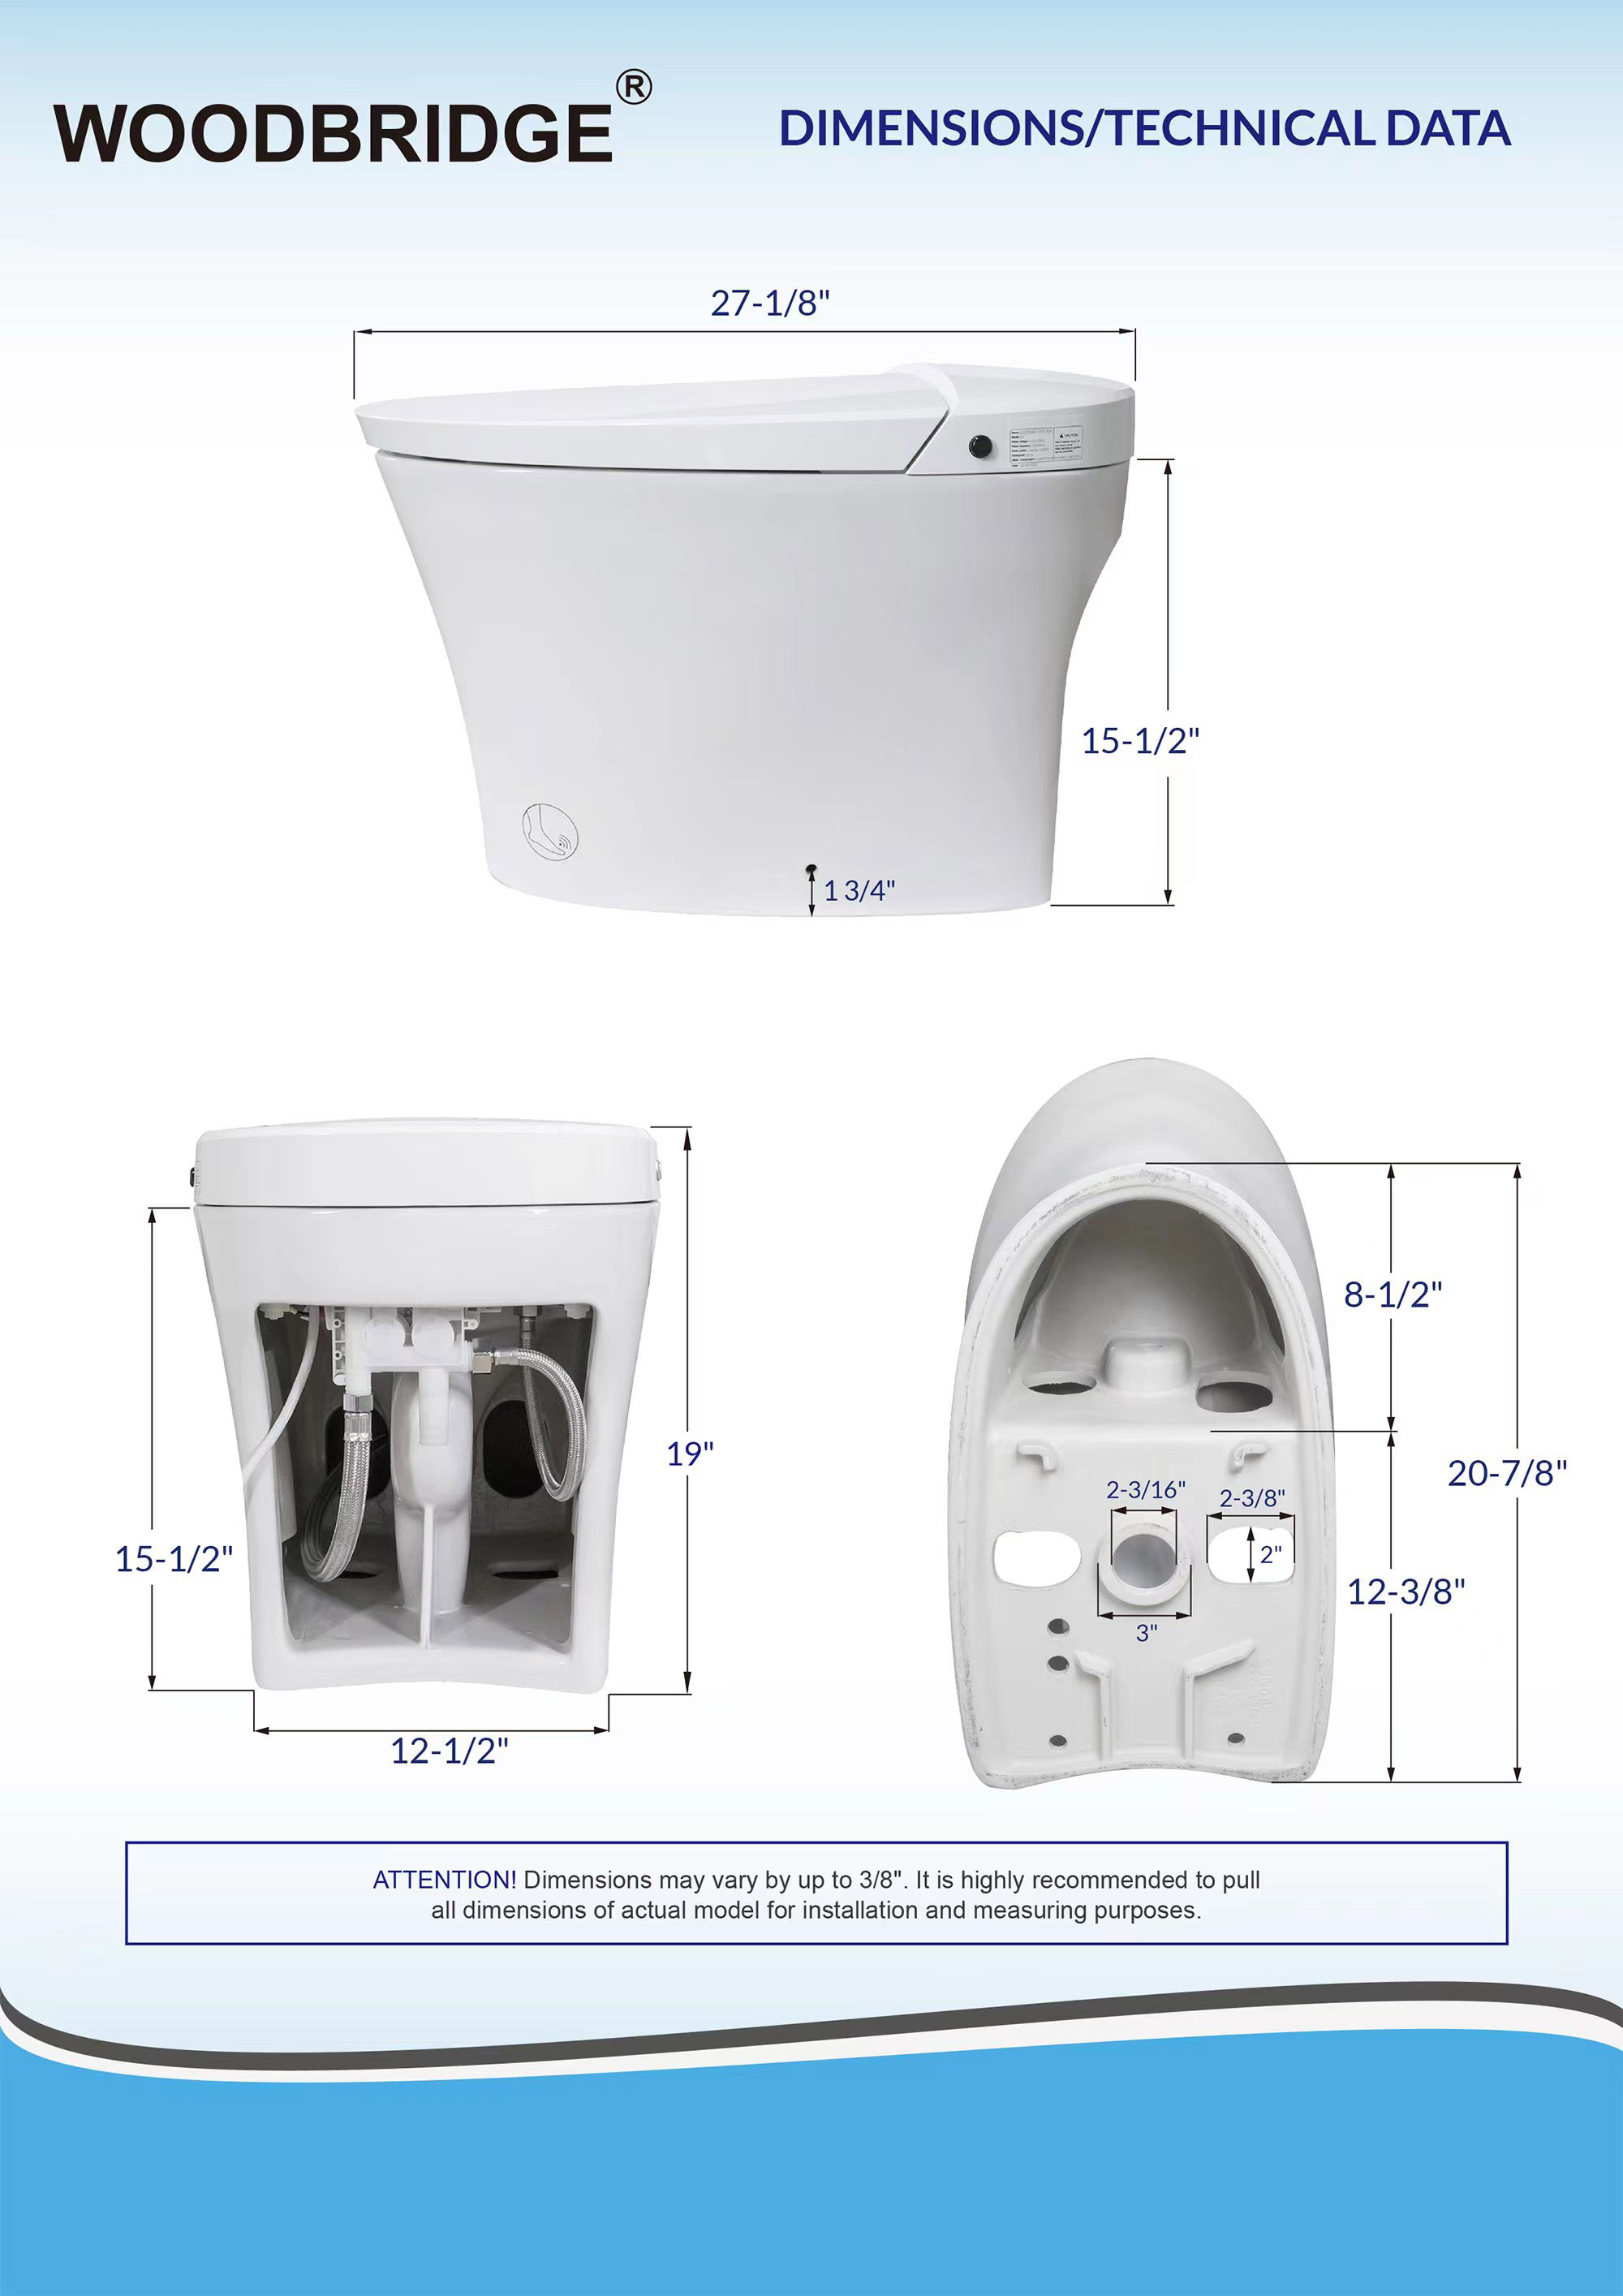  WOODBRIDGE B0970S Smart Bidet Toilet Elongated One Piece Modern Design, Foot Sensor Operation, Heated Seat with Integrated Multi Function Remote Control in White_11909